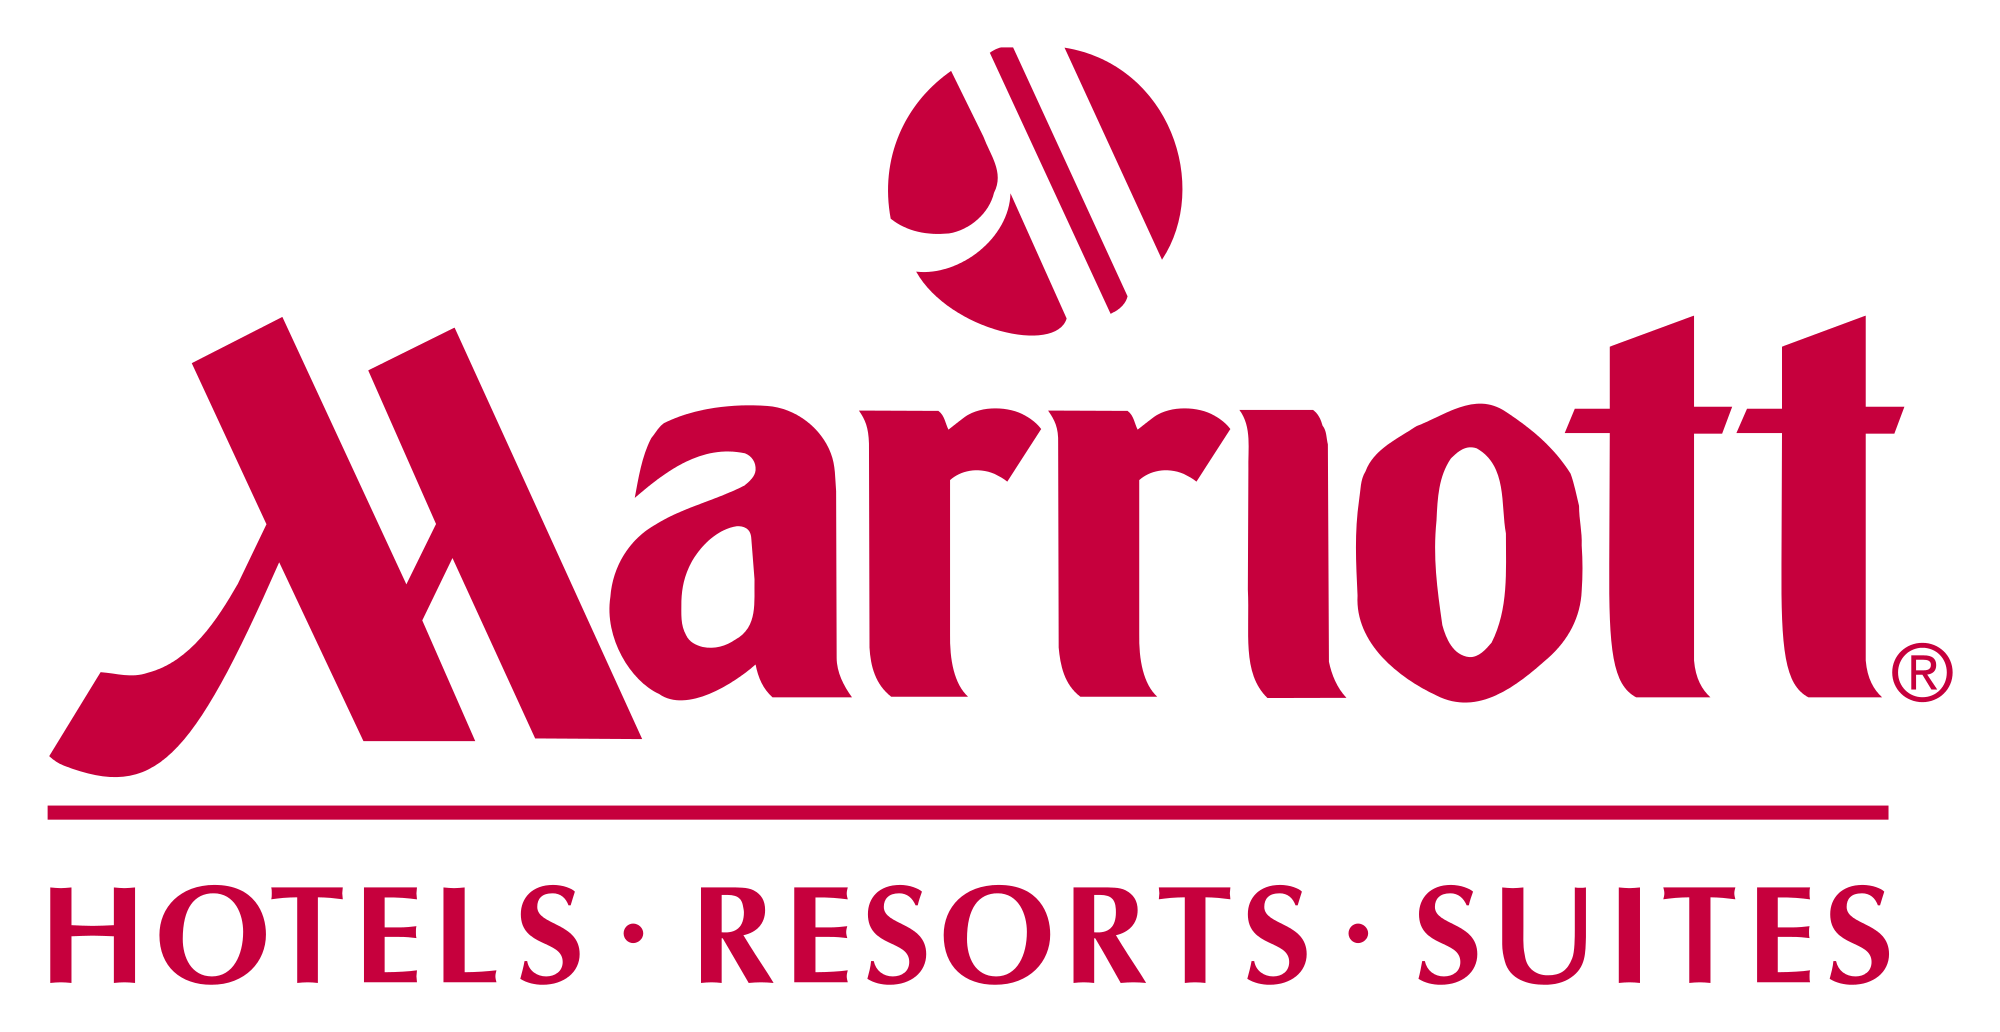 The Marriot Group